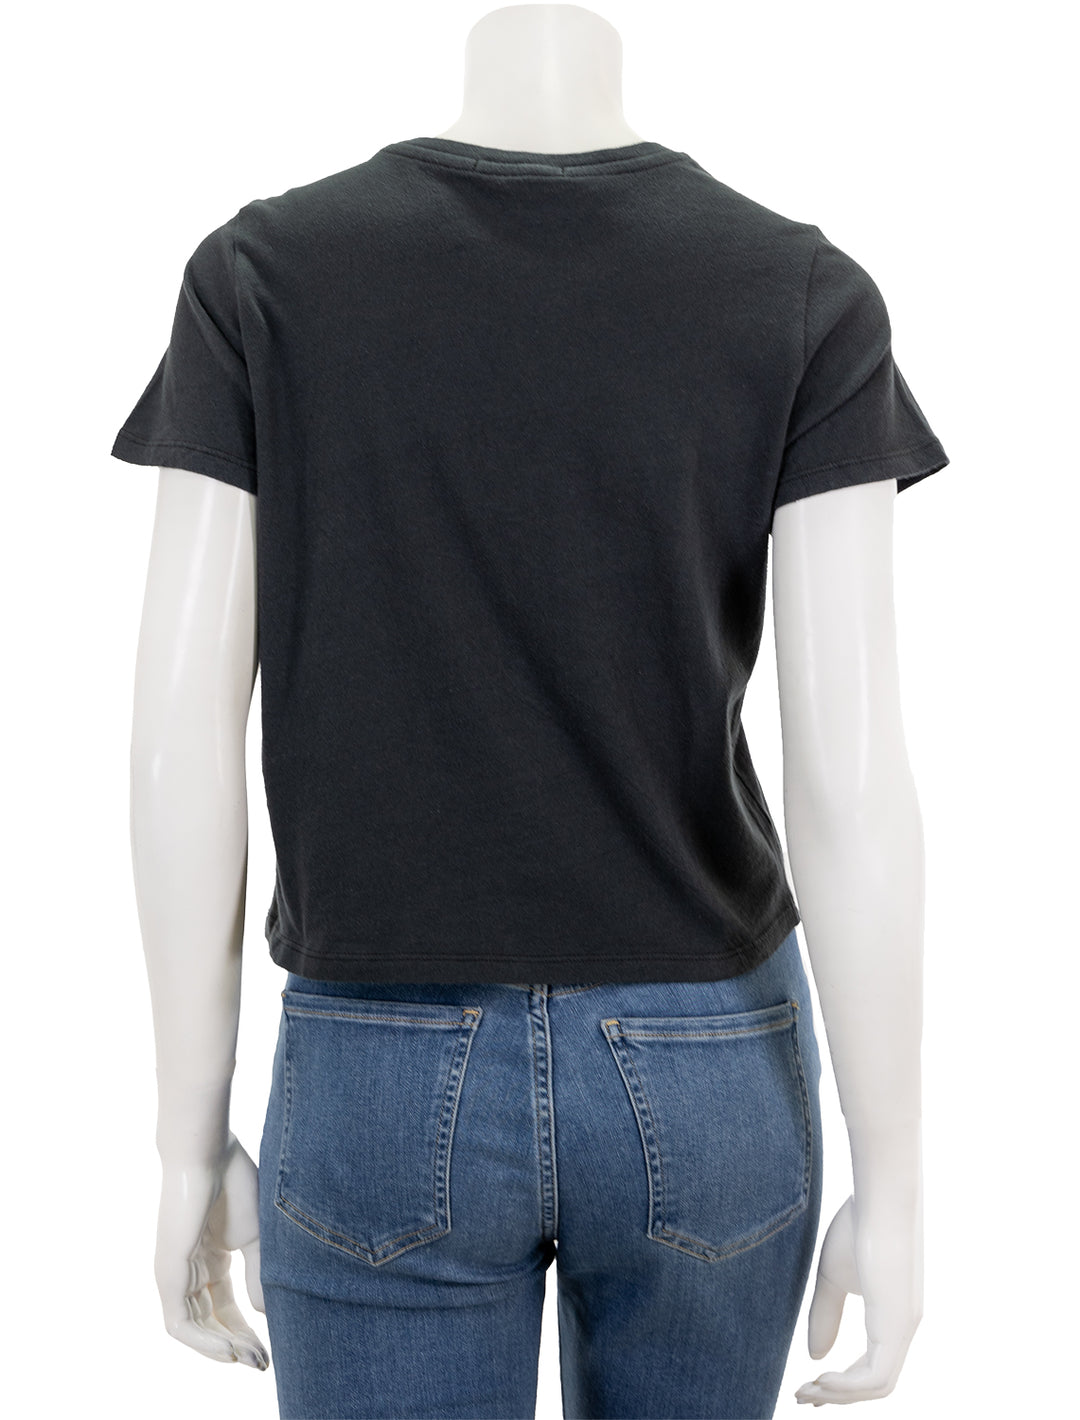 Back view of Marine Layer's Crop Graphic Tee in Washed Black.